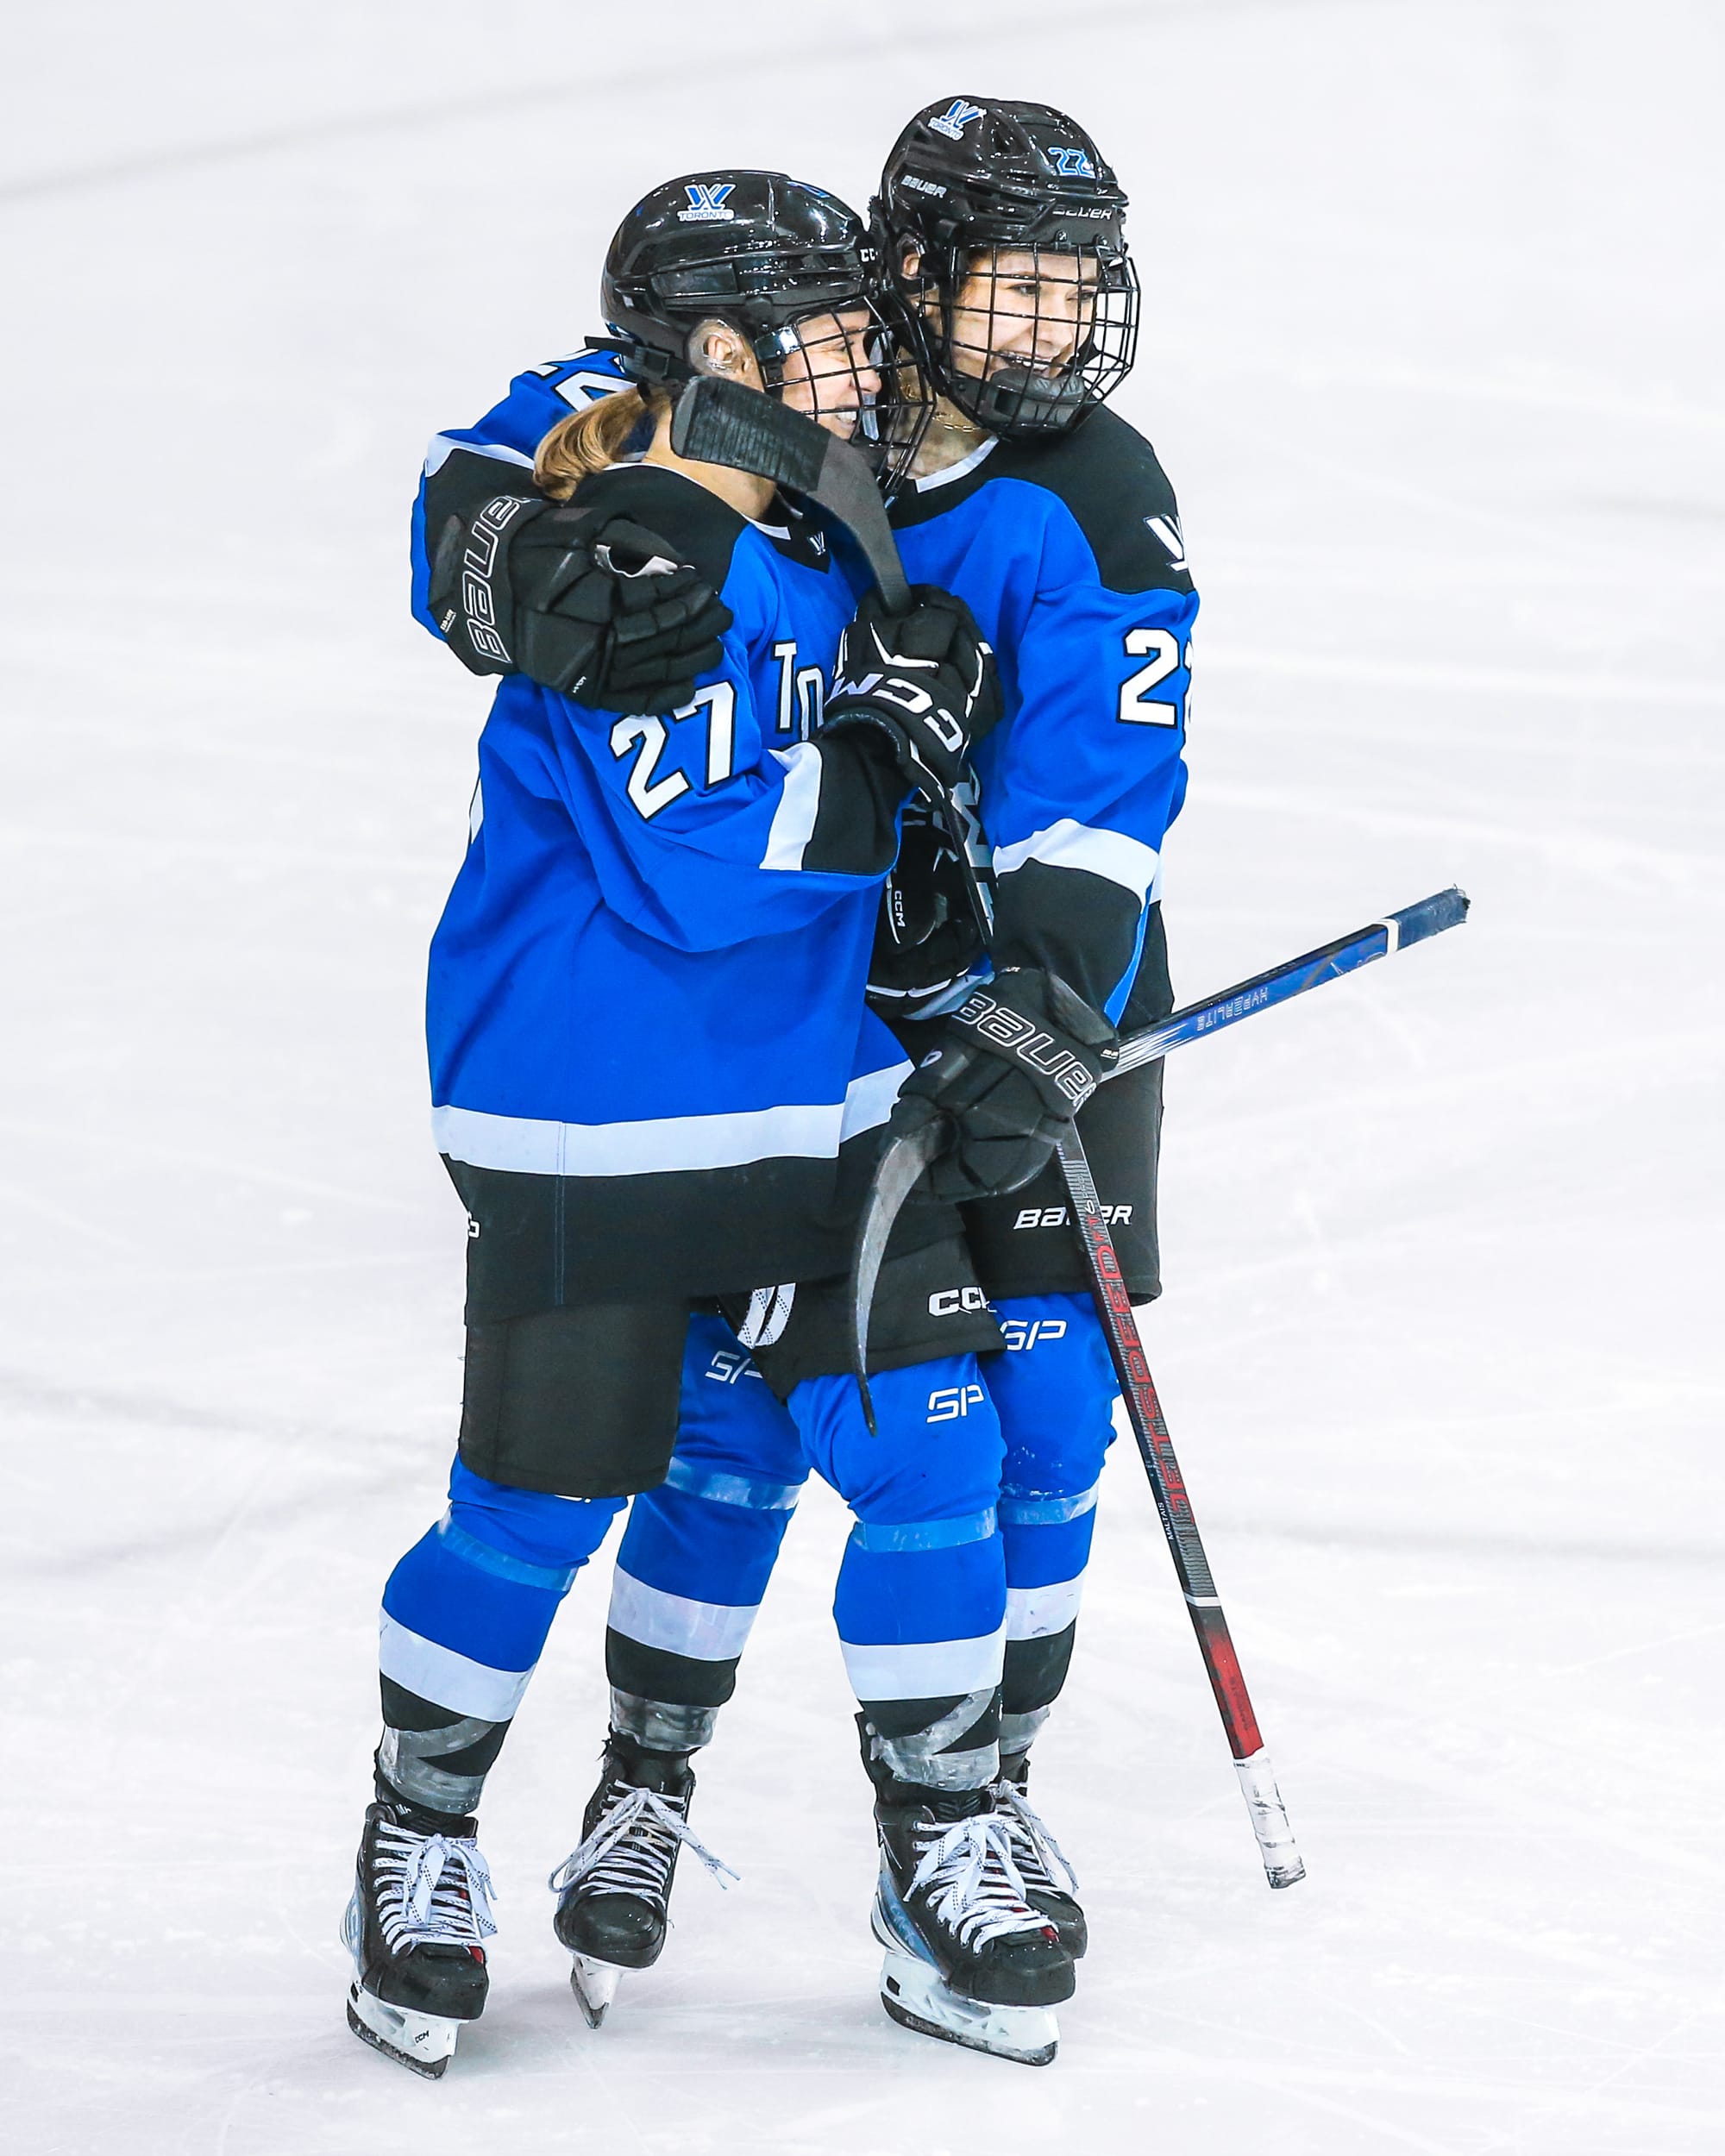 Maggie Connors embraces Emma Maltais. Both are wearing their blue home uniforms.